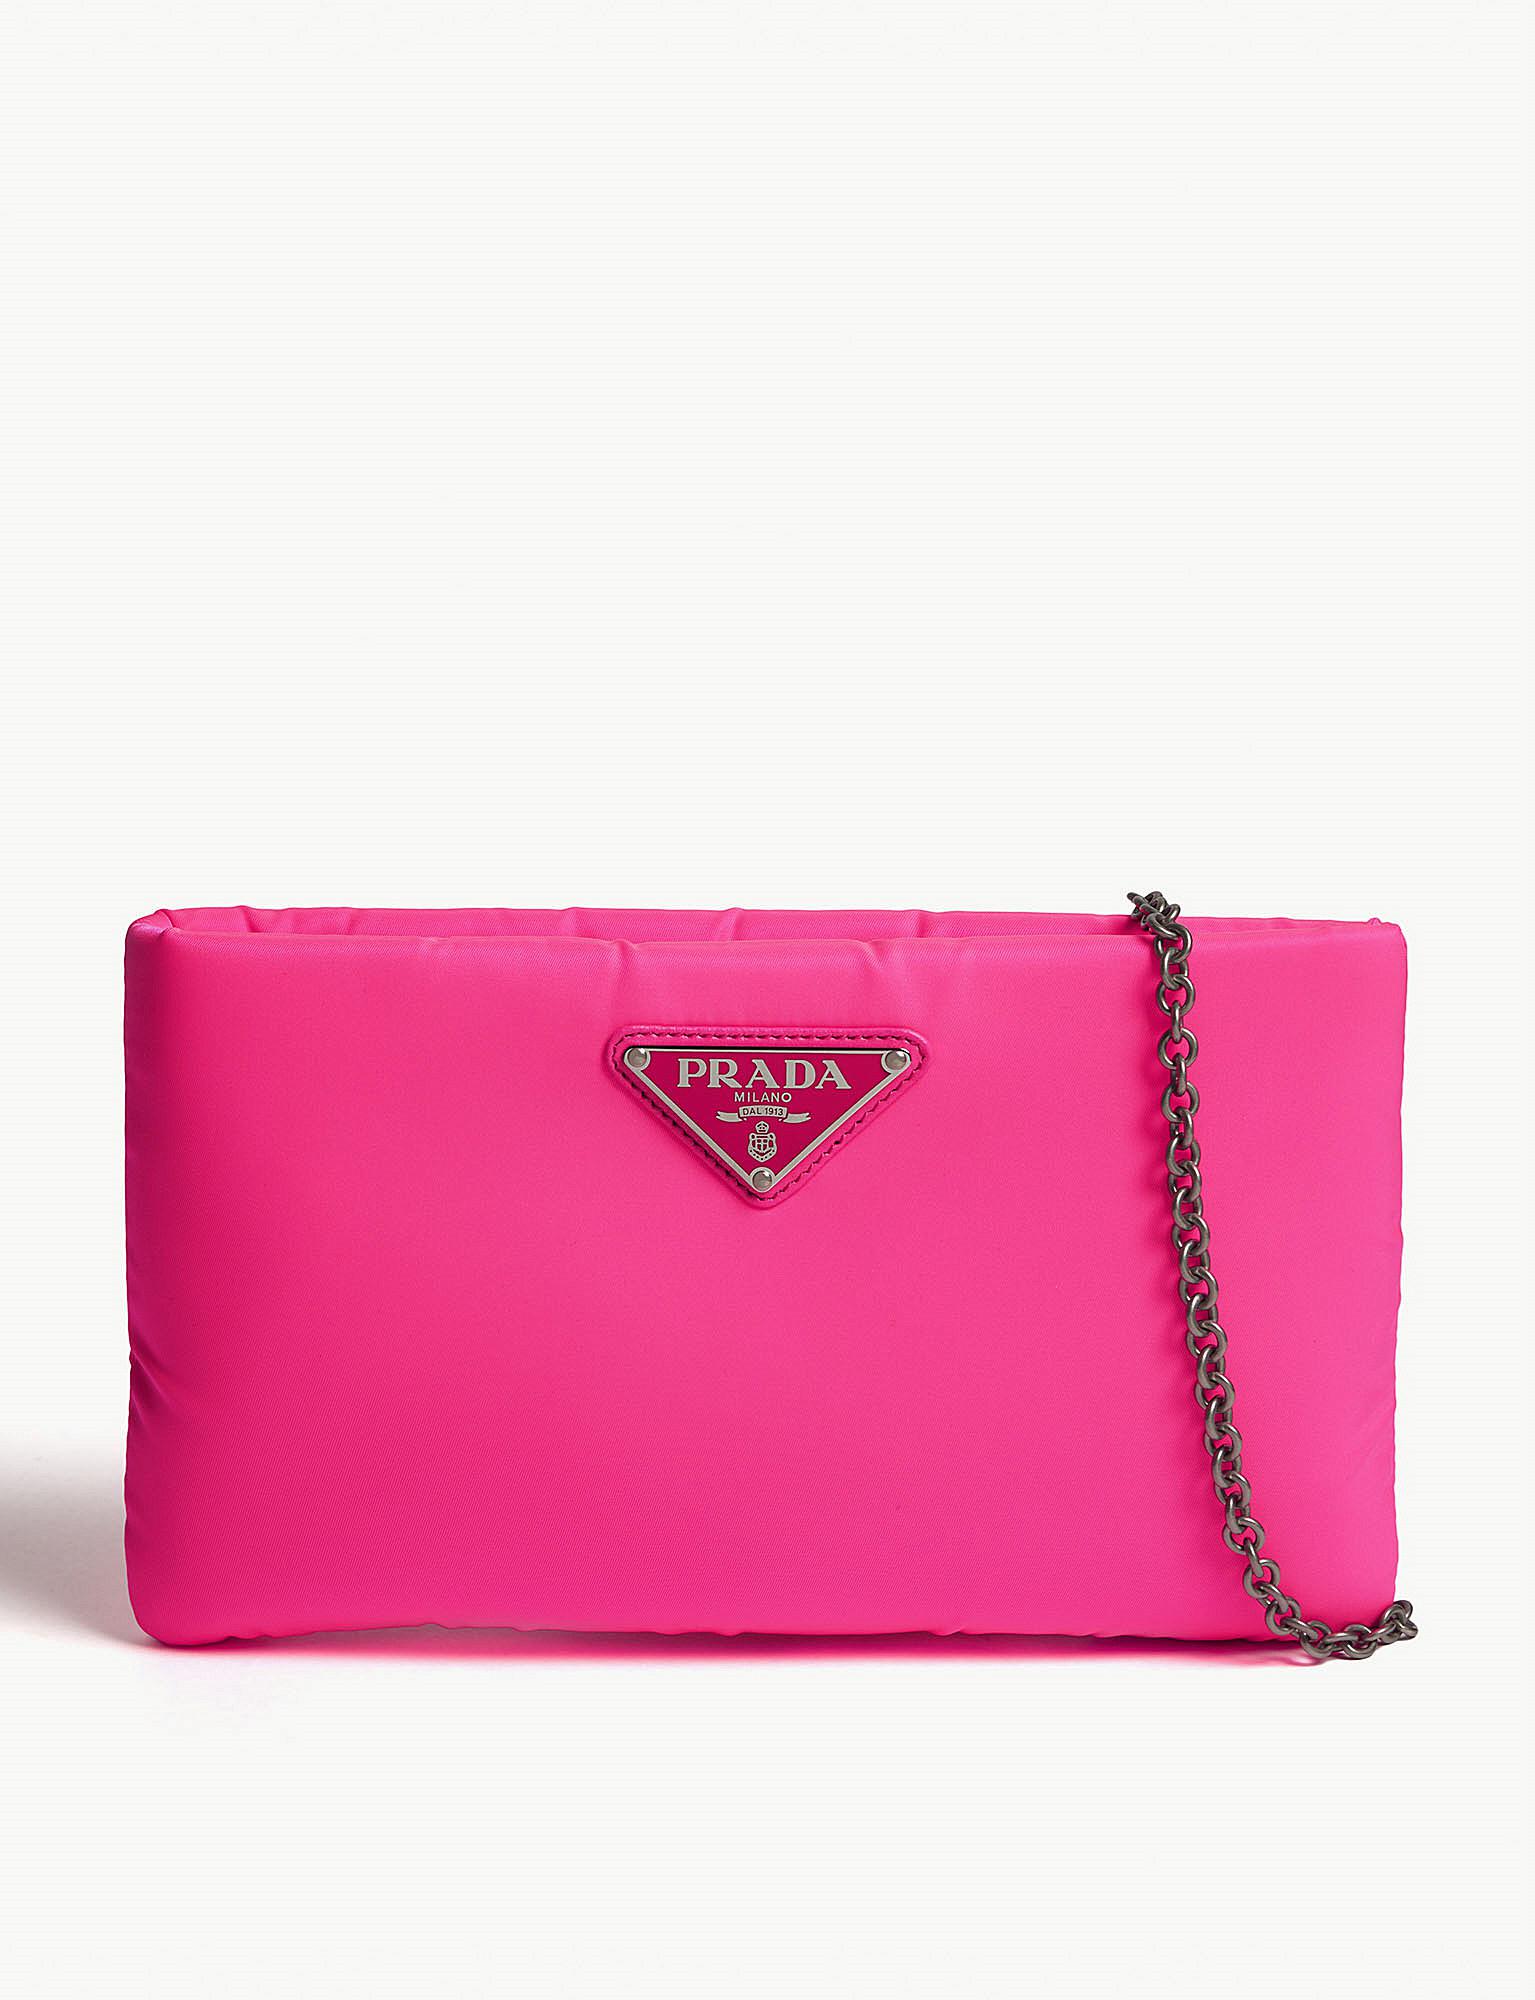 Prada Fluo Large Padded Nylon Clutch in Pink | Lyst